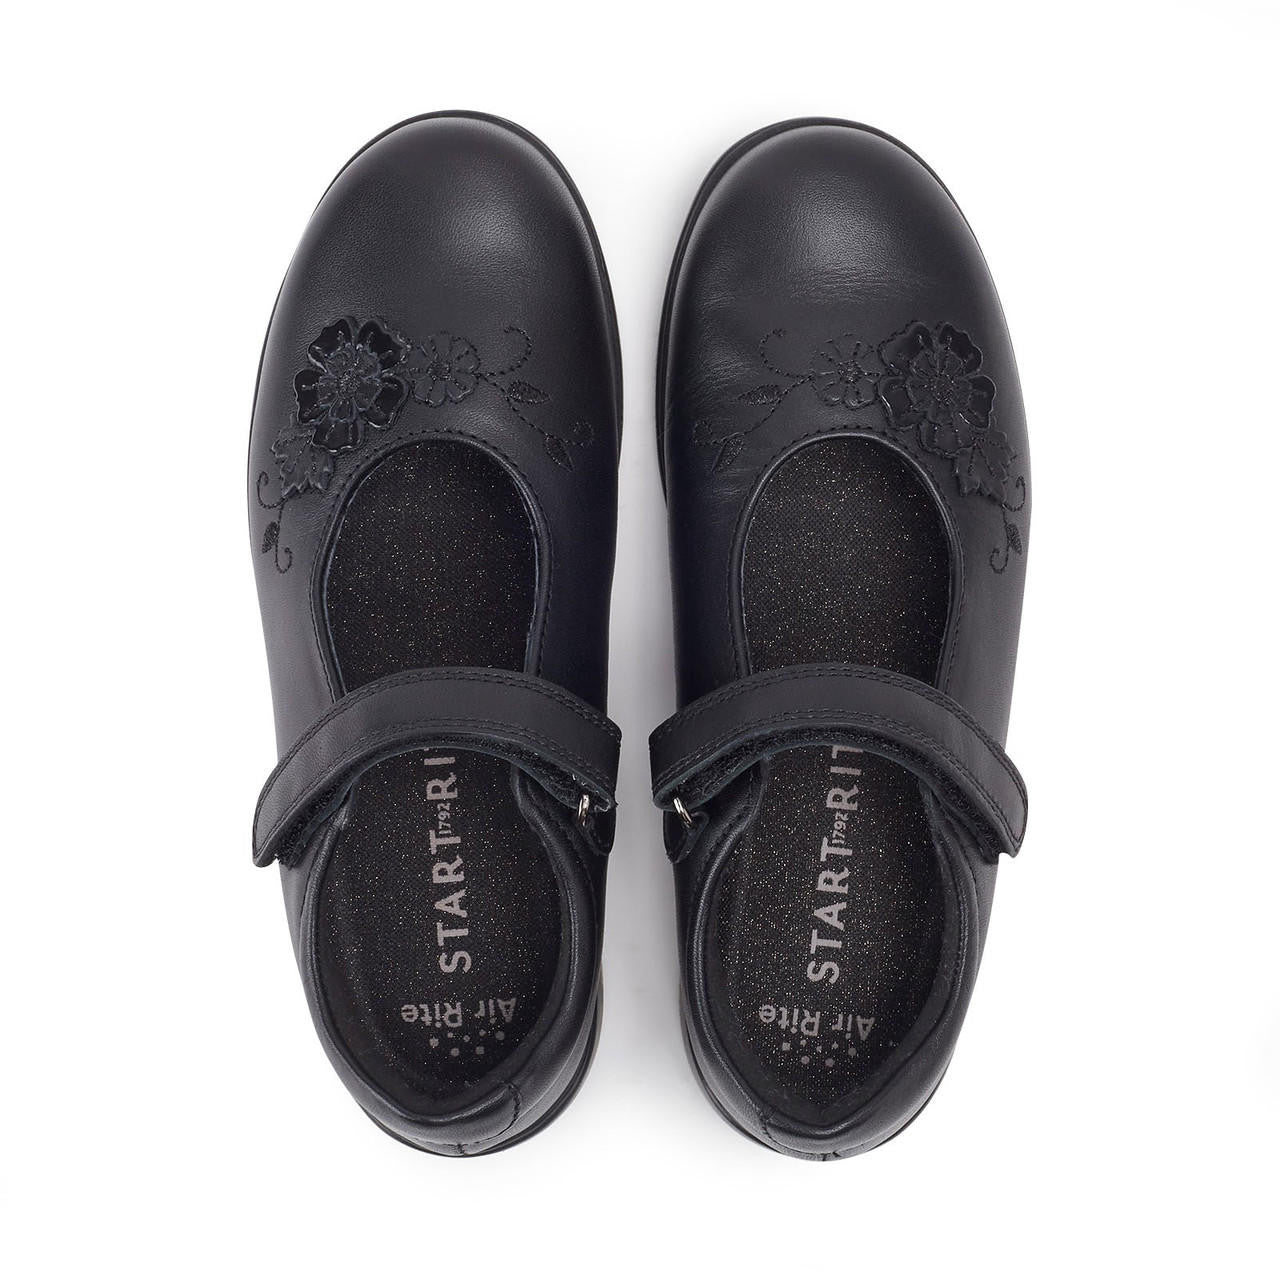 A pair of girls Mary Jane school shoes by Start Rite, style Wish, in black leather with flower motif and velcro fastening. View from above